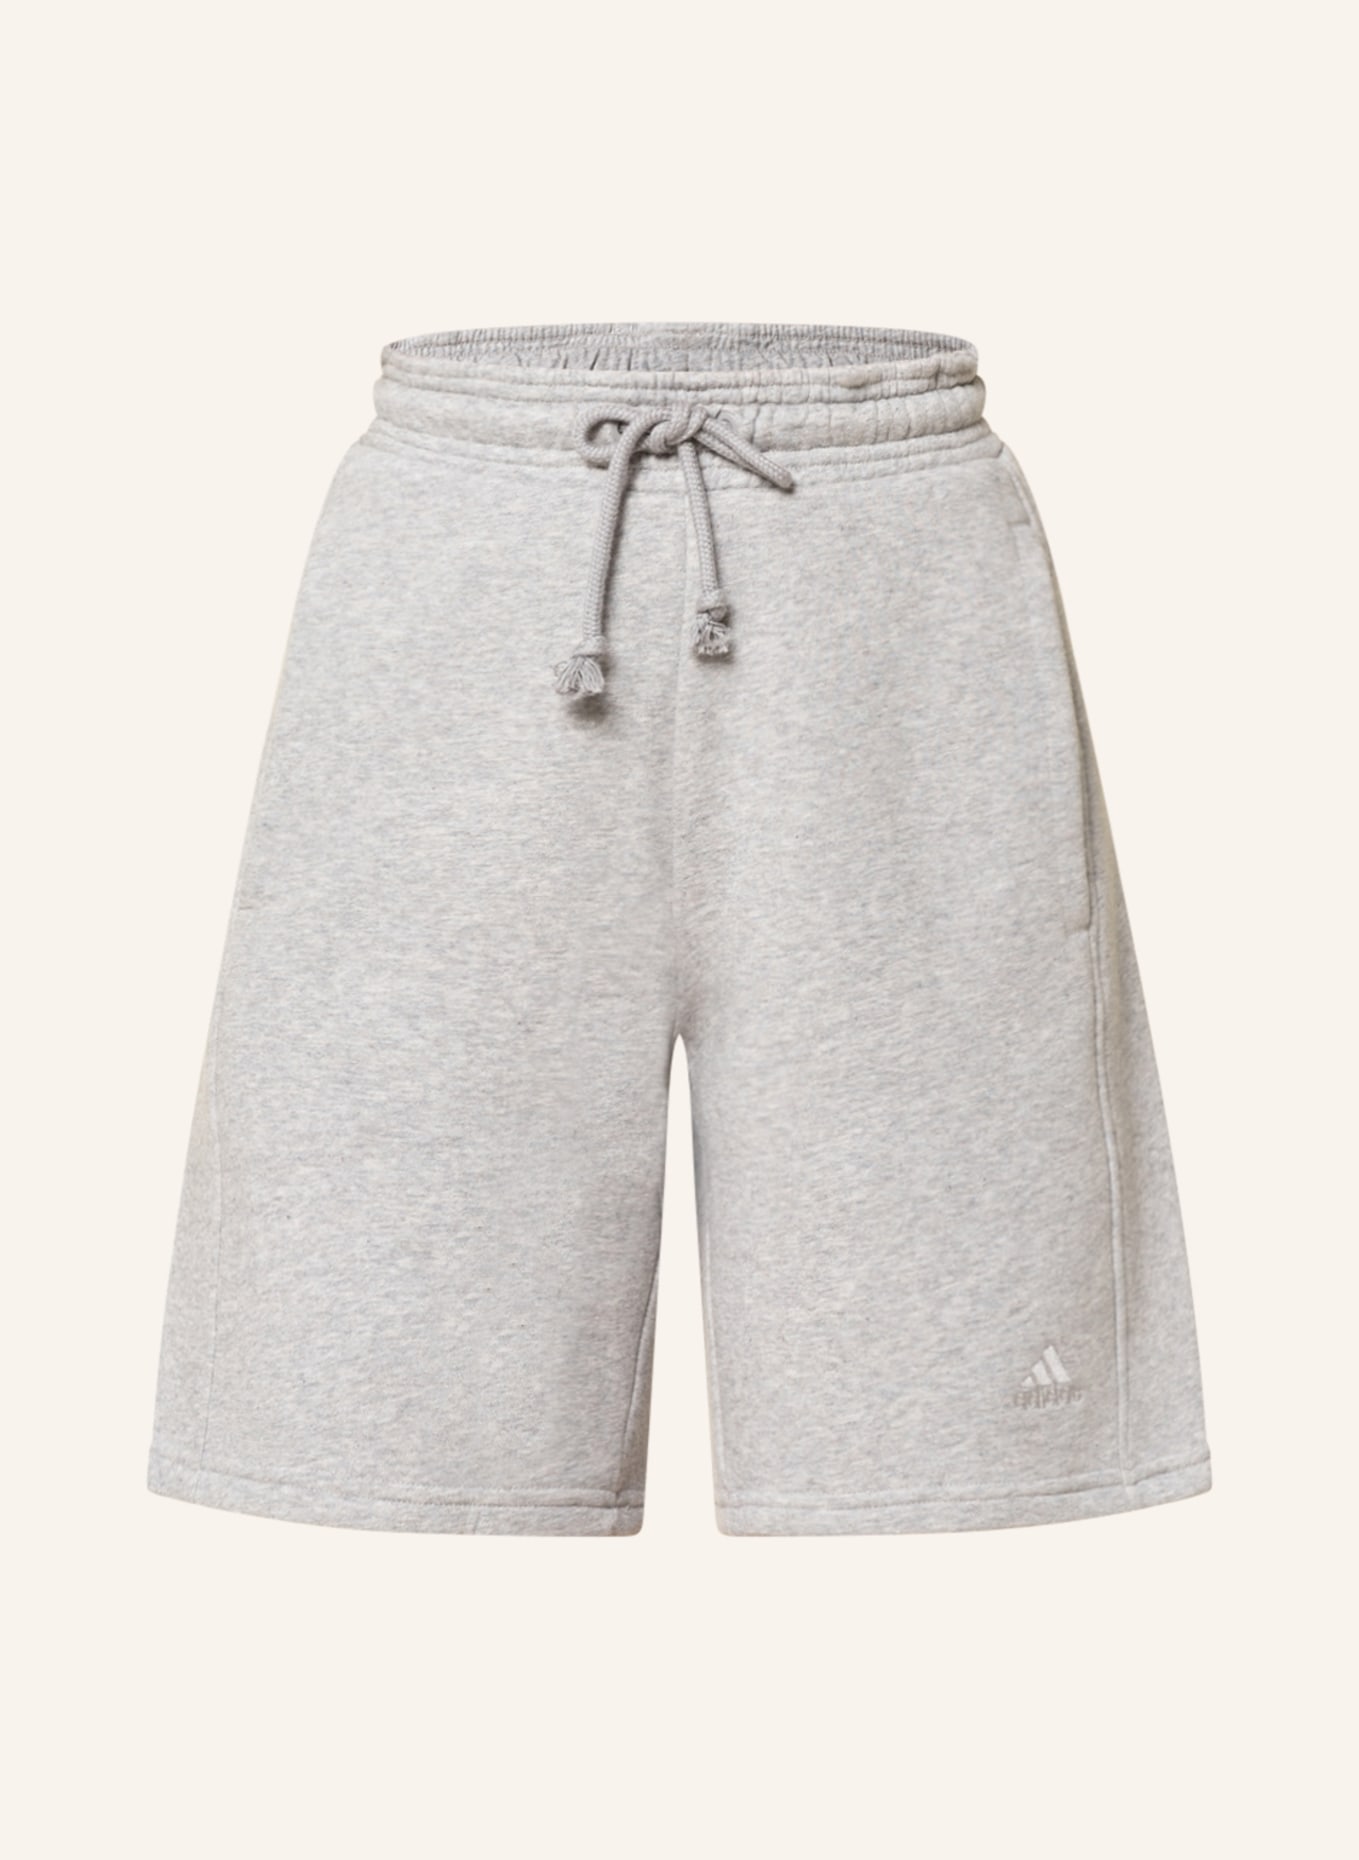 adidas Sweat shorts ALL SZN, Color: GRAY (Image 1)